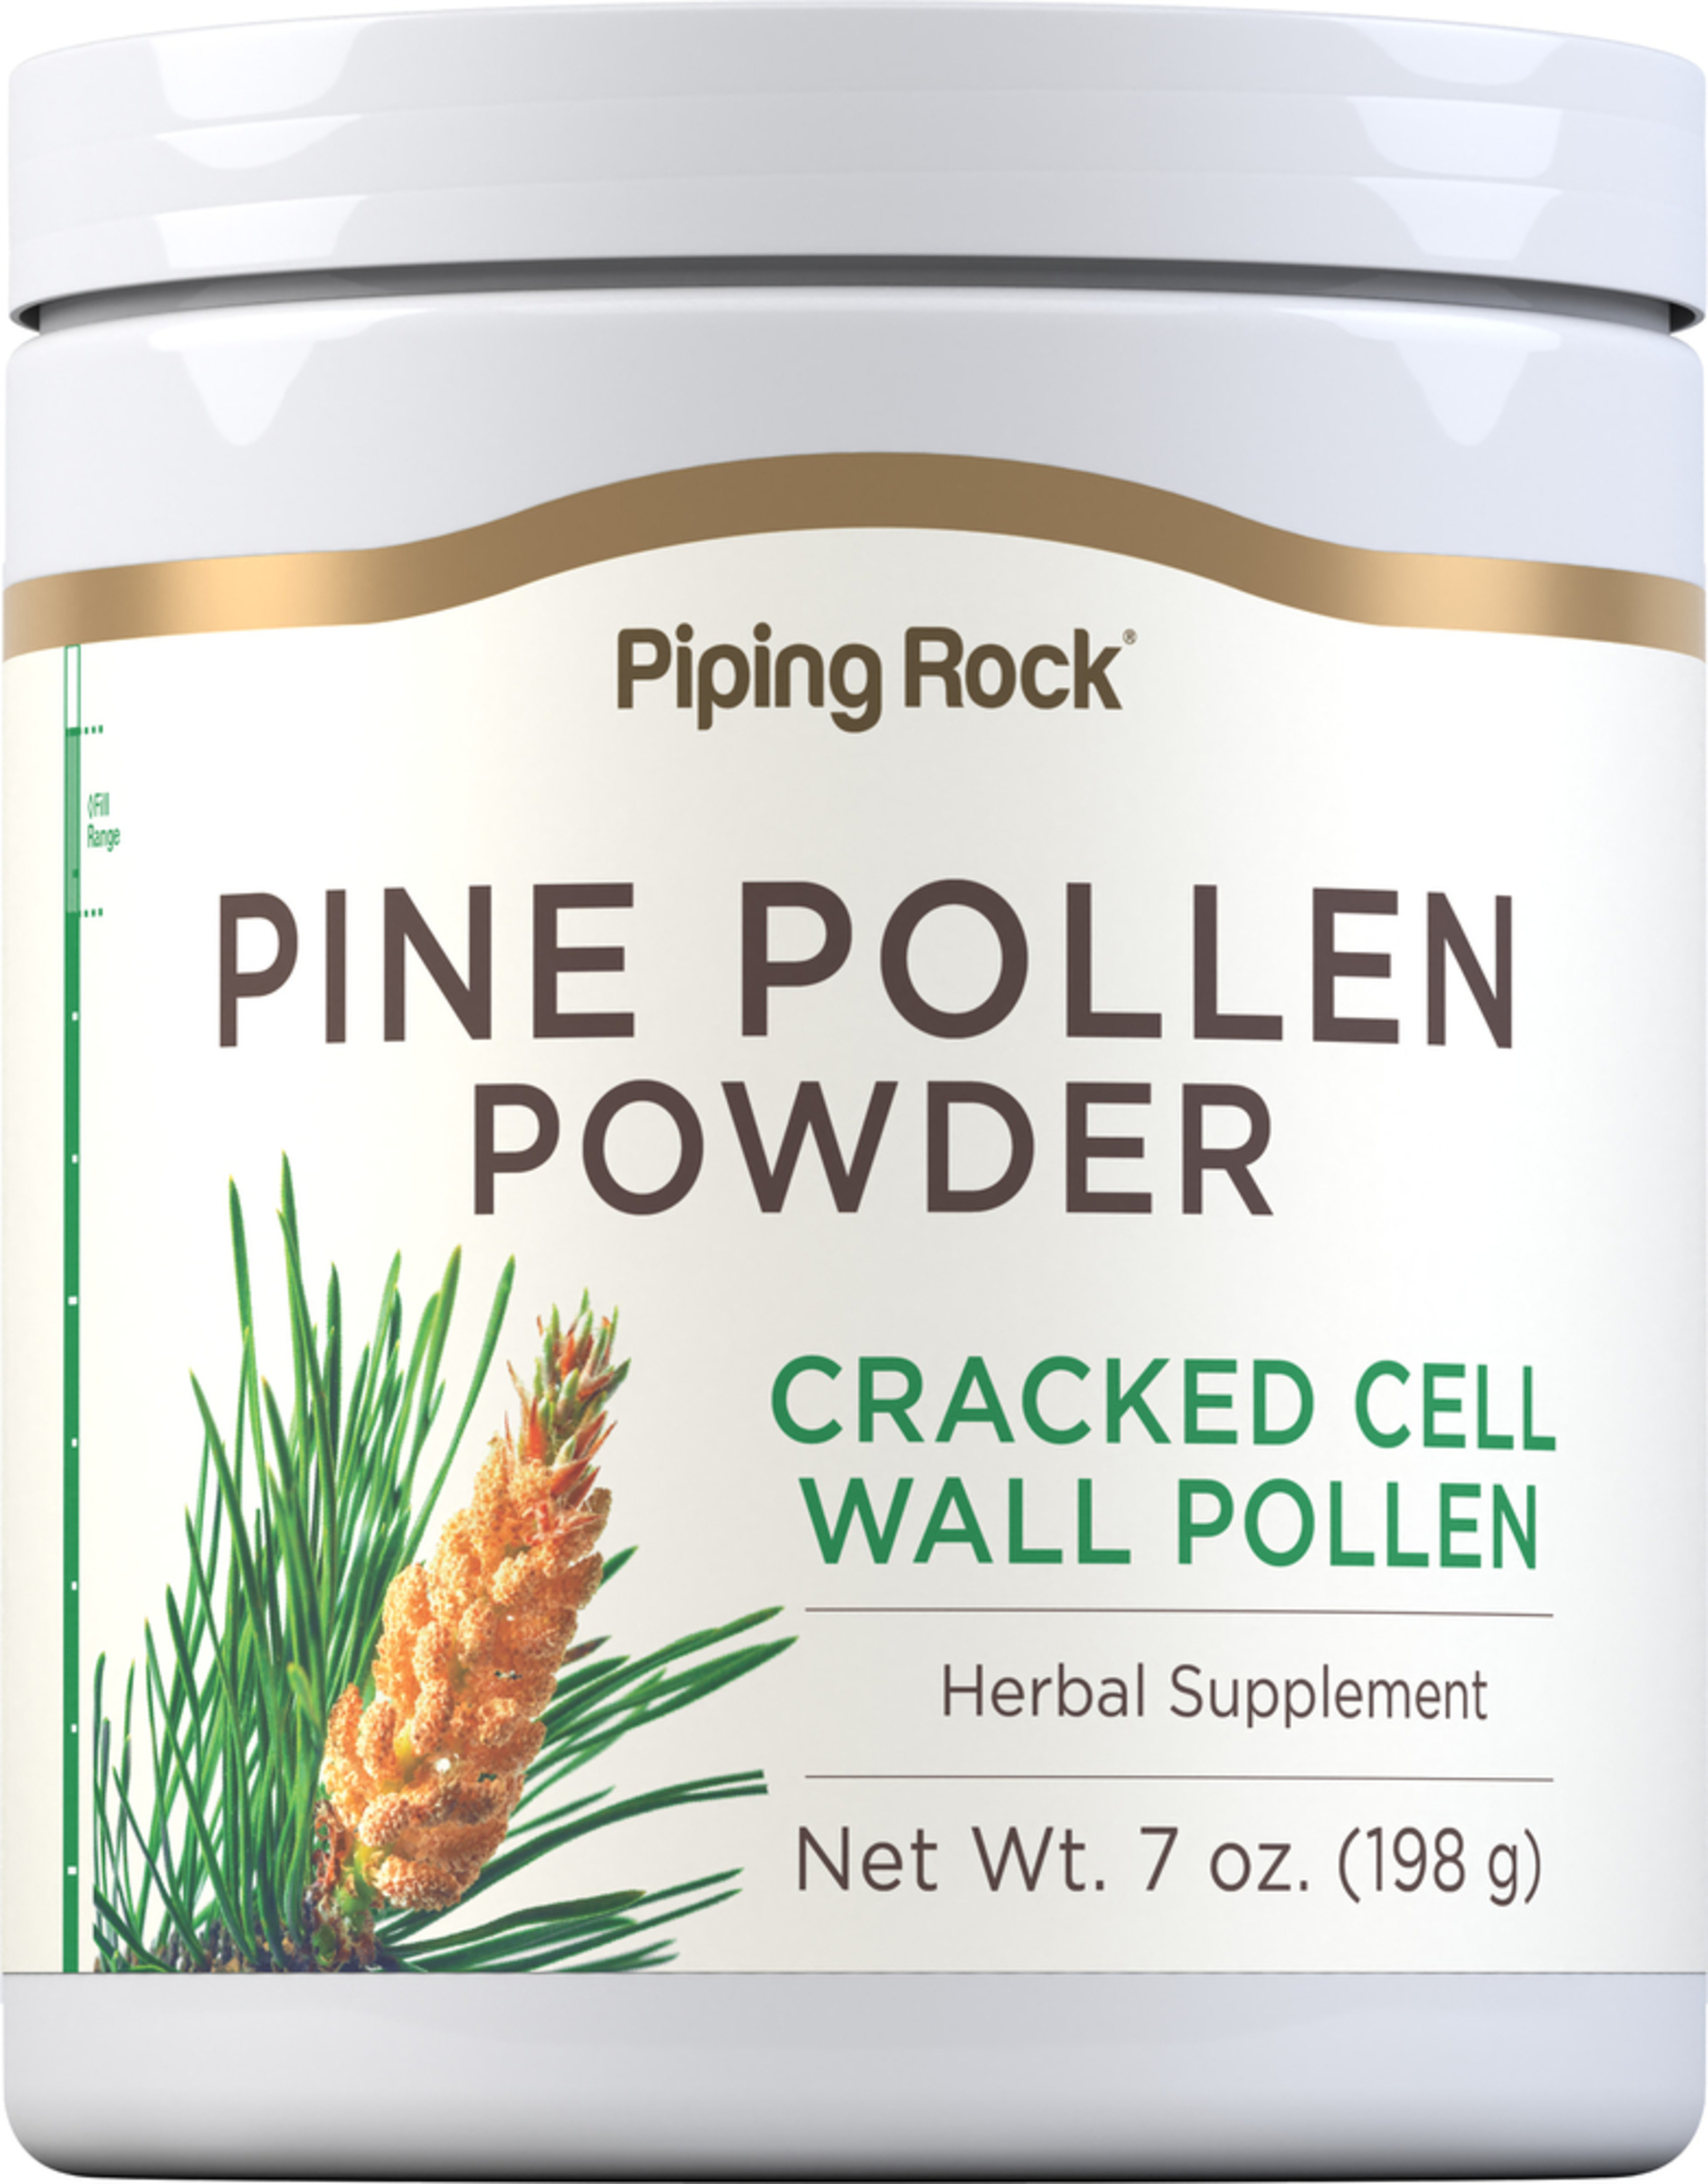 Pure Pine Pollen Powder, 6 Ounce, Wild Harvest an Broken Cell Wall,  Supports Immune System Health, Boosts Energy, Antioxidant & Androgenic, No  GMOs